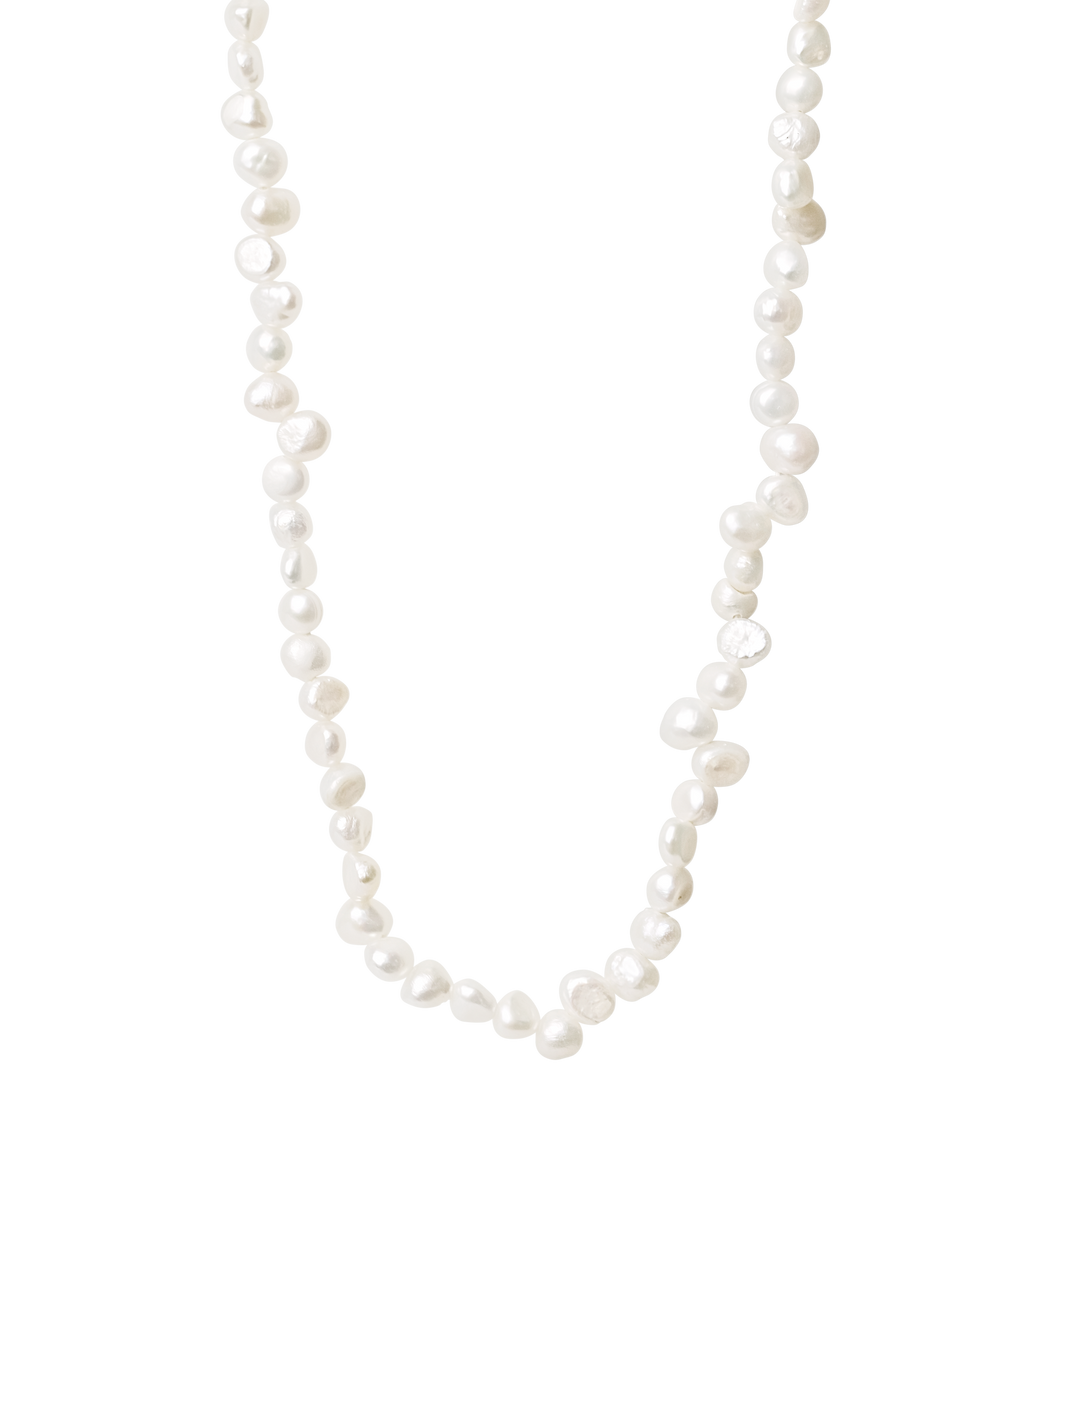 Necklace made of chunky irregular freshwater pearls